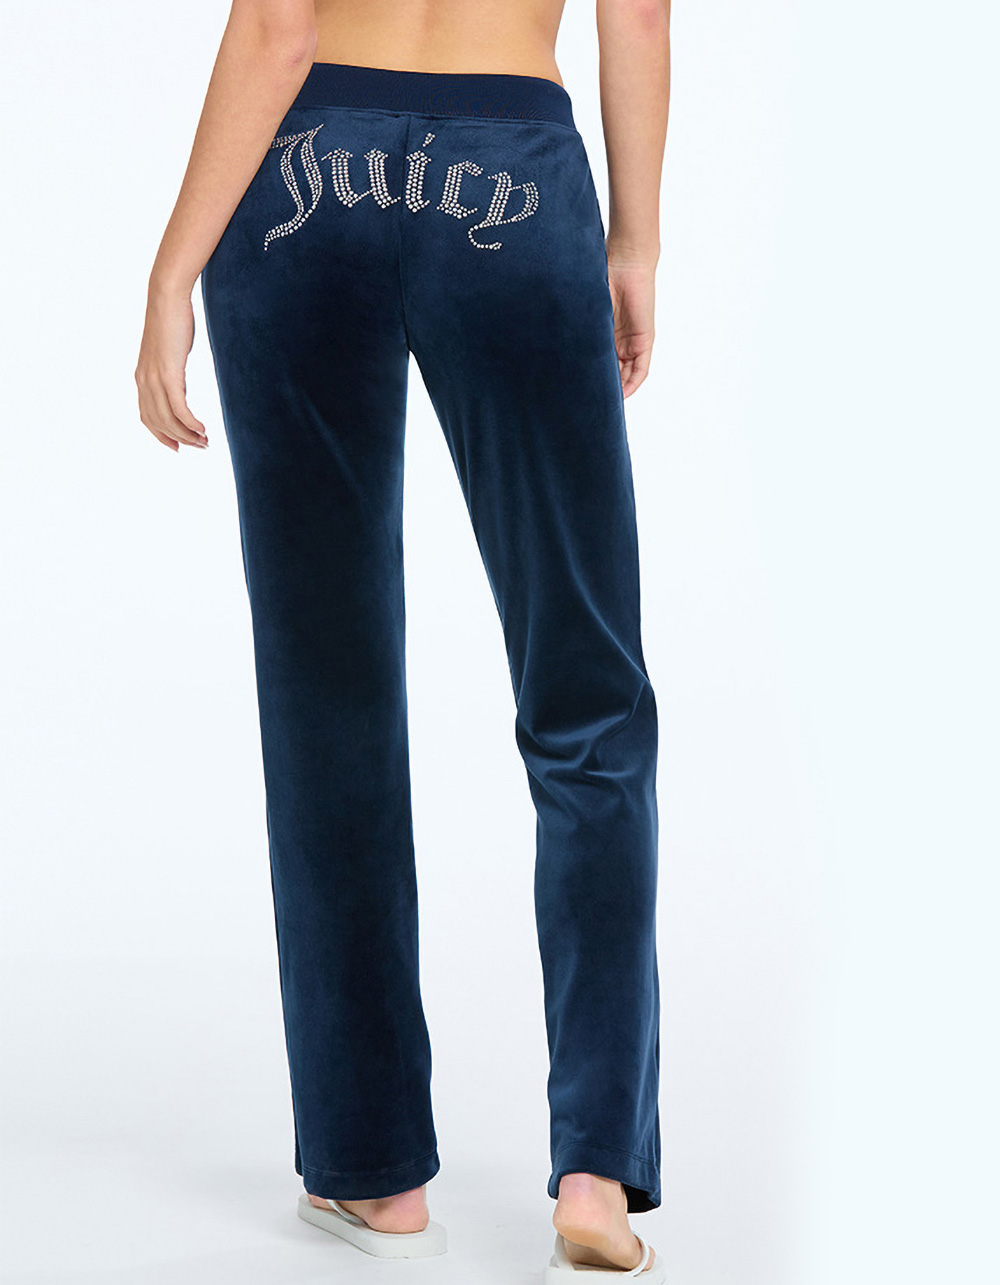 JUICY COUTURE OG Bling Womens Track Pants - NAVY | Tillys